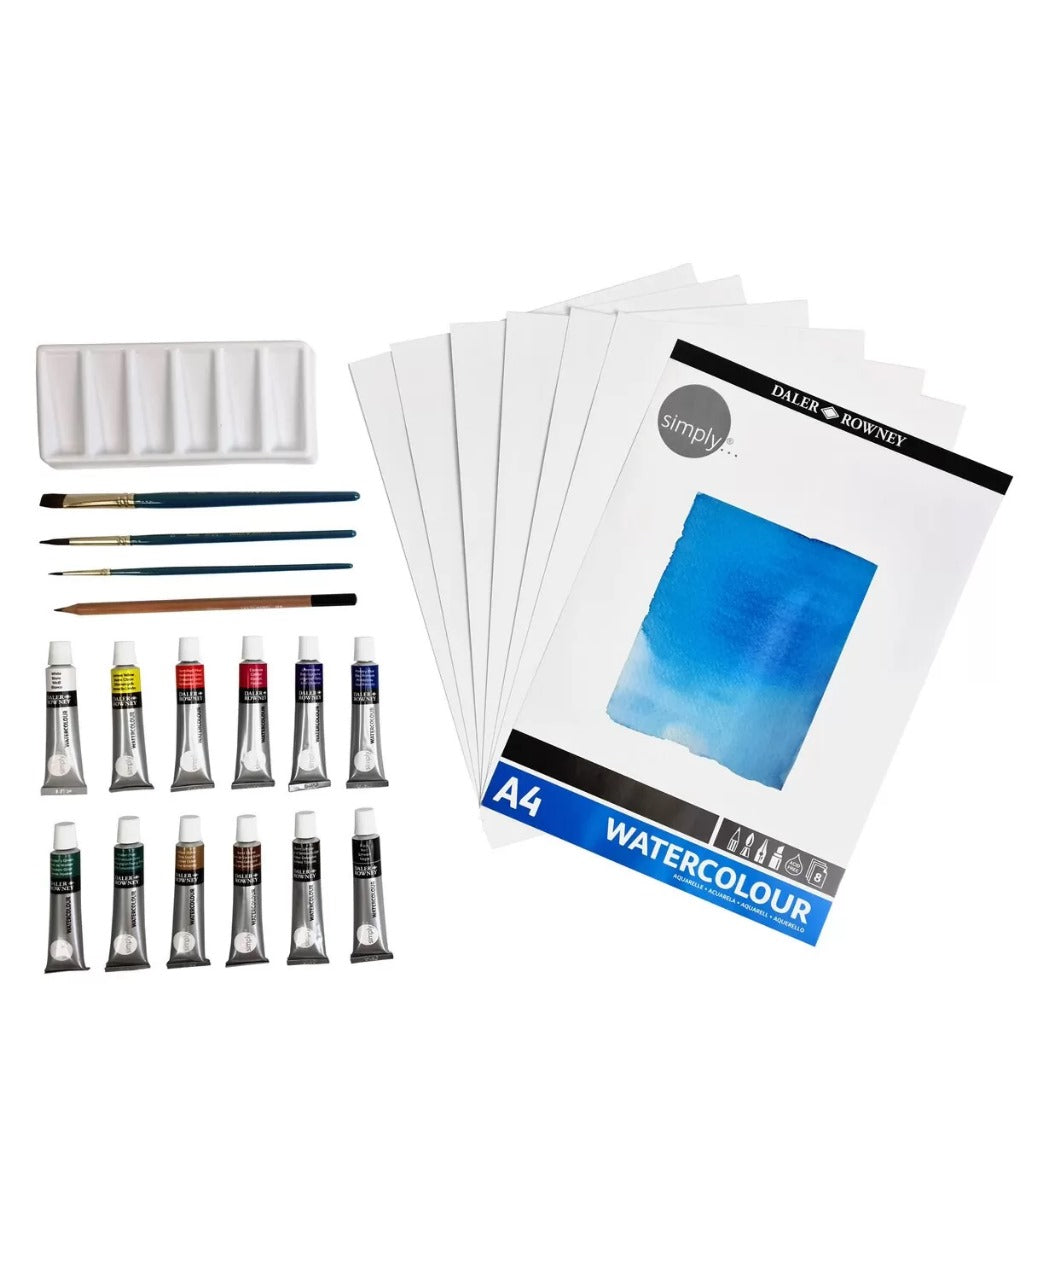 Daler-Rowney Simply Watercolor Painting Set Of 25